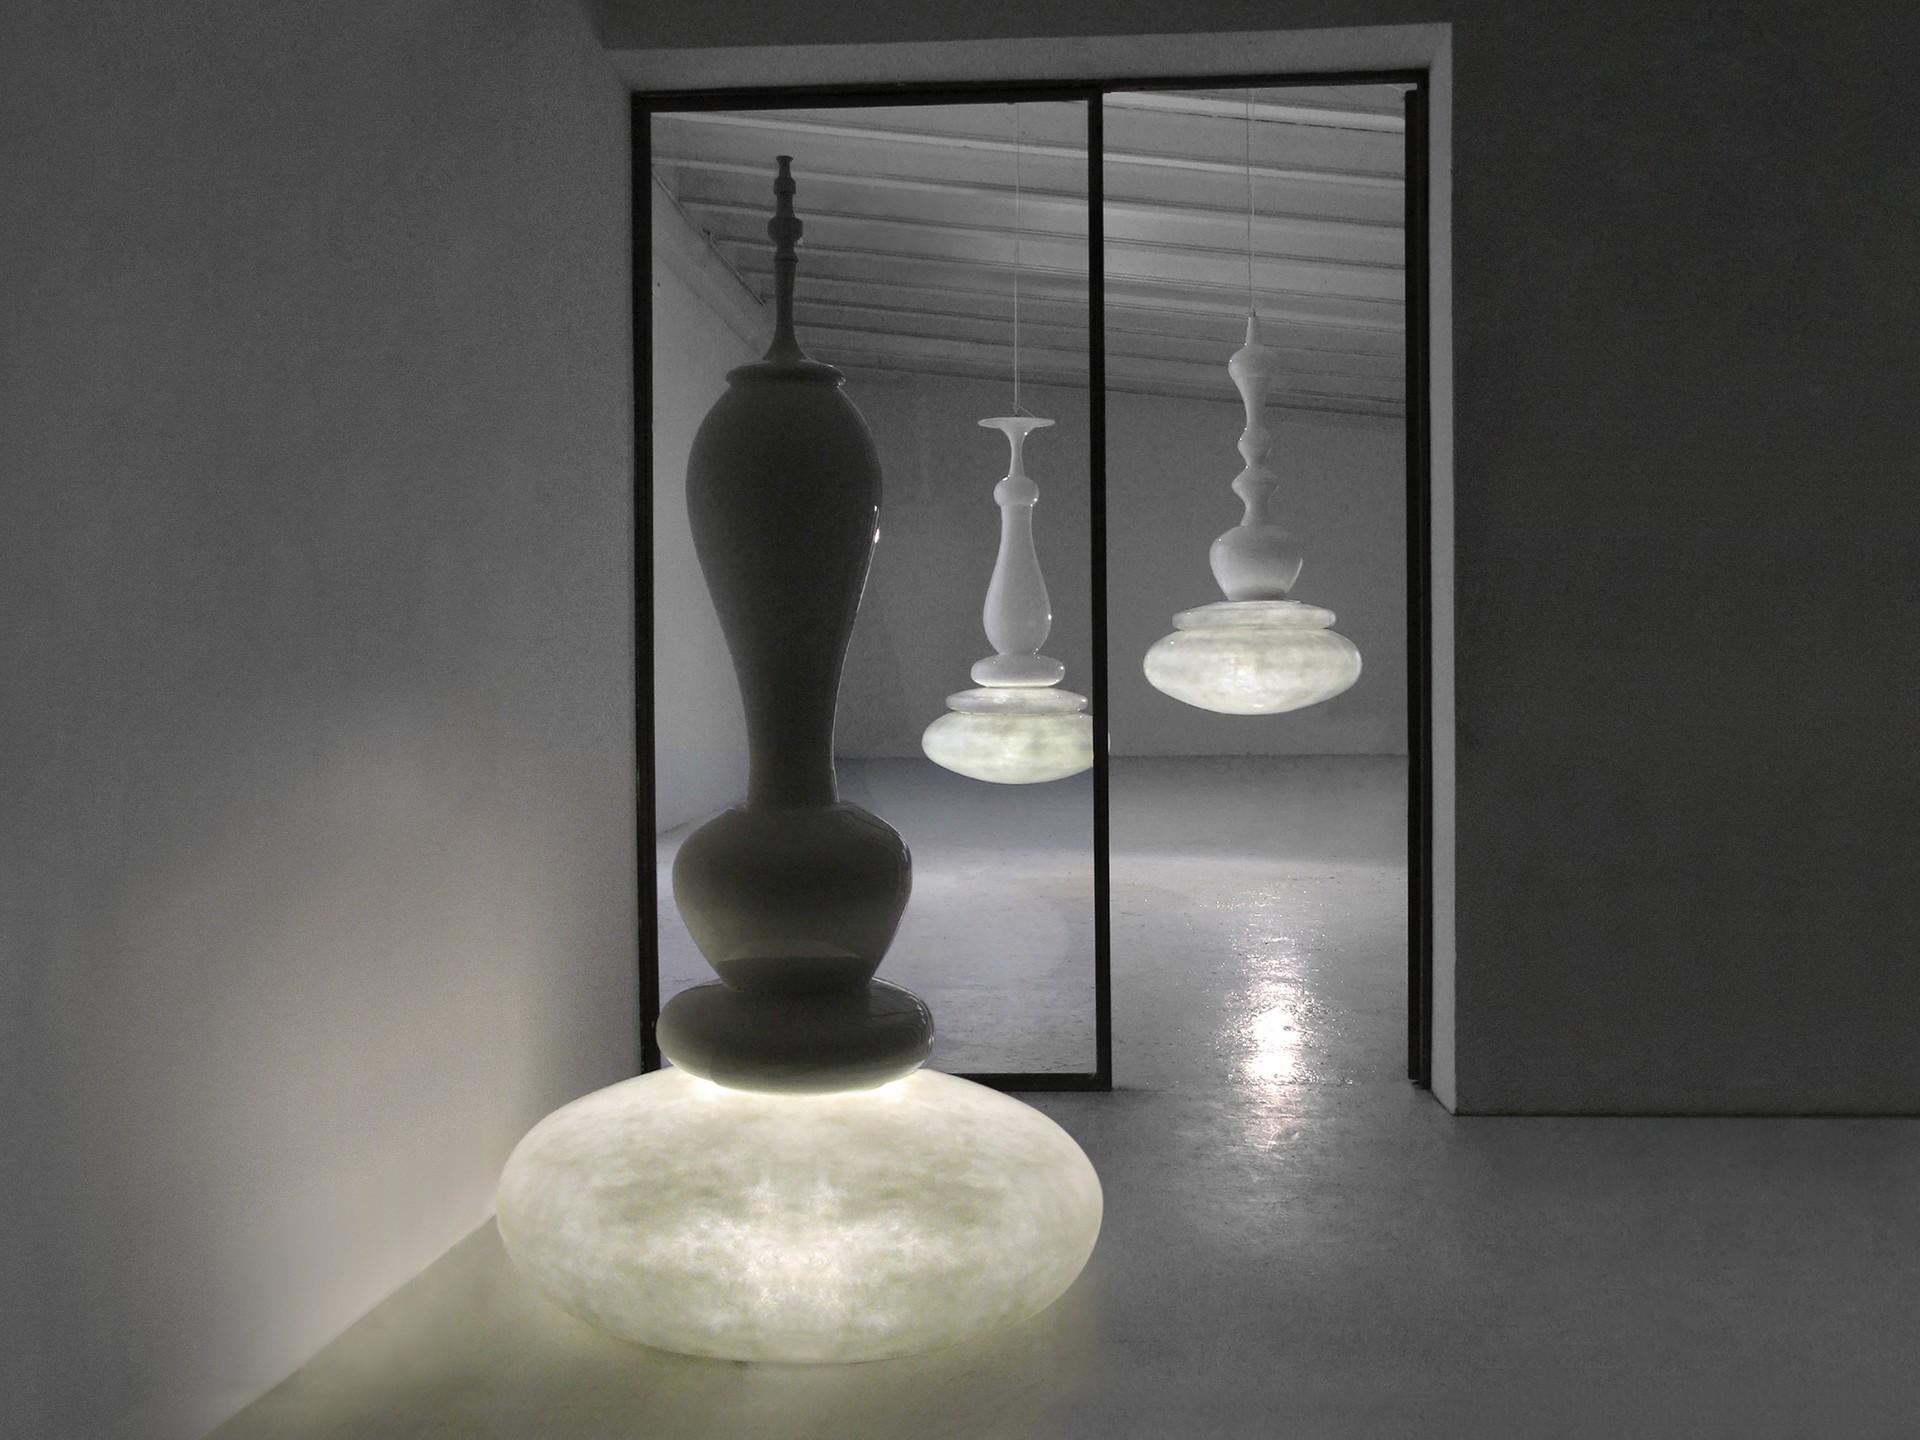 finial definition lamp